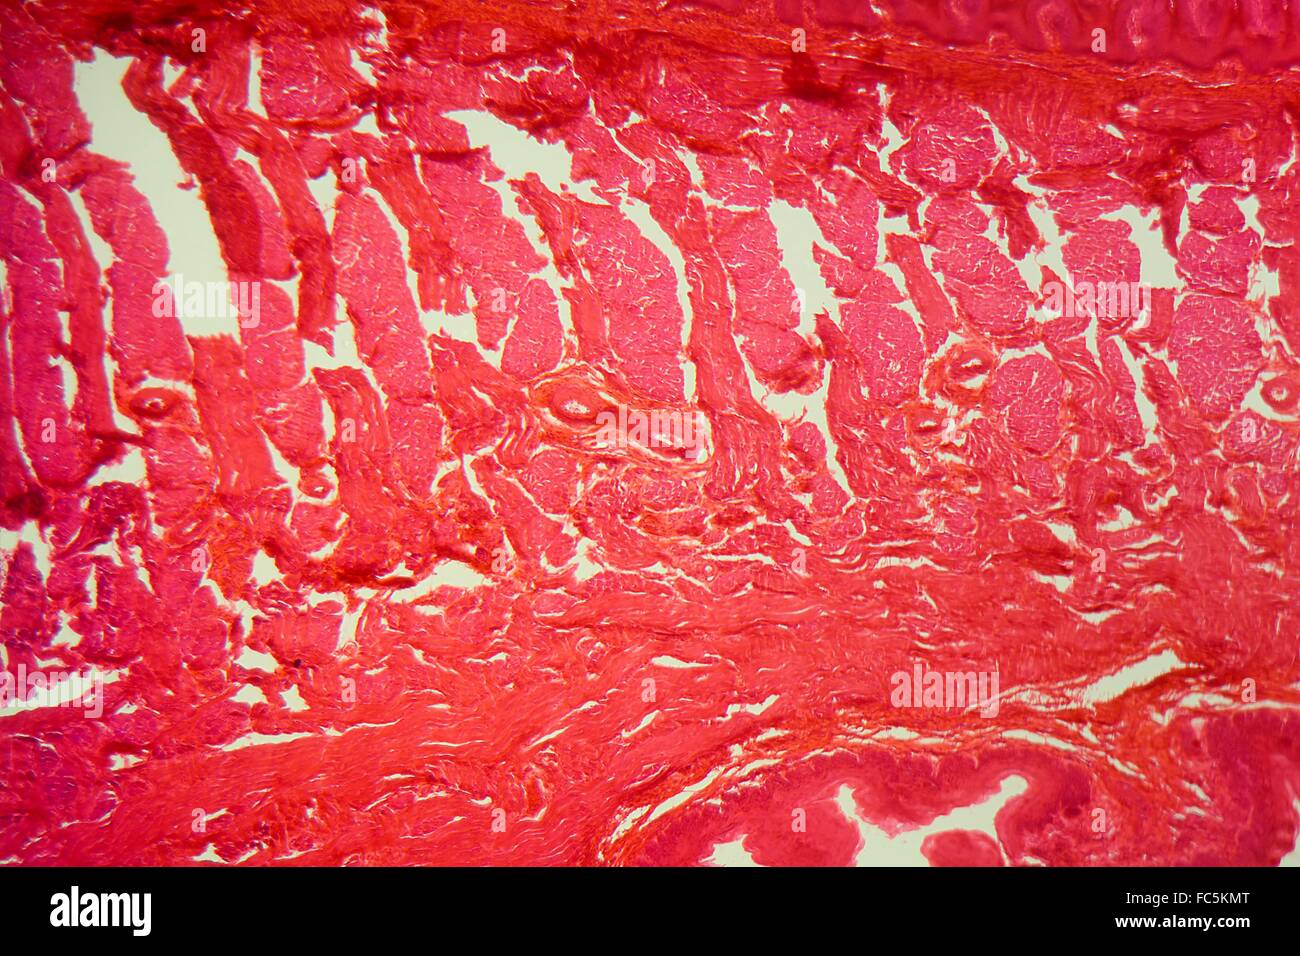 Muscels of a tongue under the microscope Stock Photo